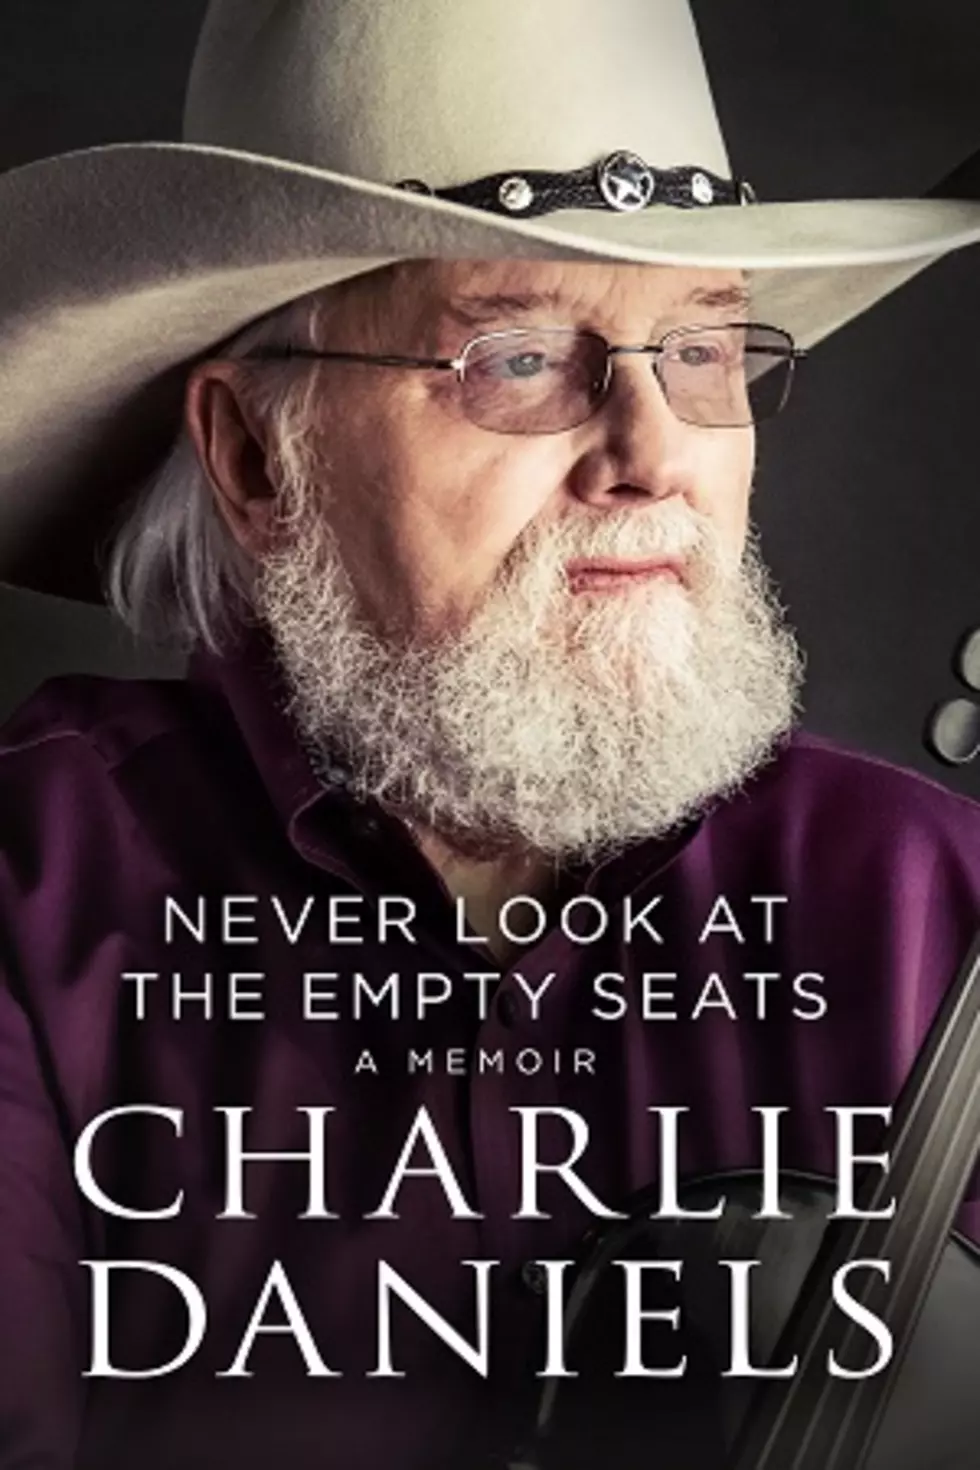 Charlie Daniels Is Releasing a Memoir, &#8216;Never Look at the Empty Seats&#8217;